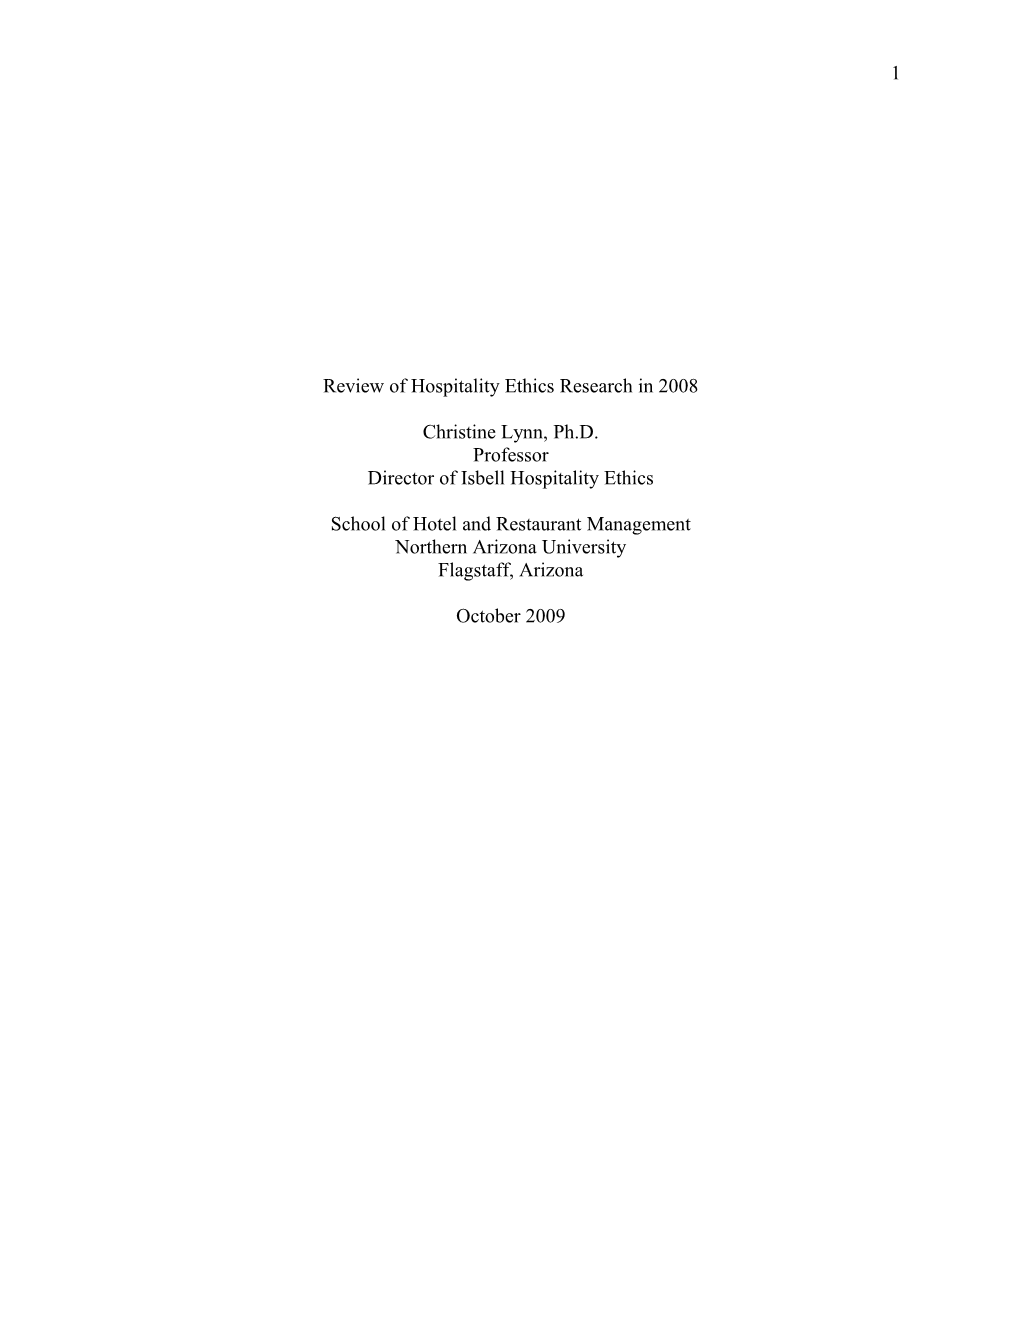 Review of Hospitality Ethics Research in 2008